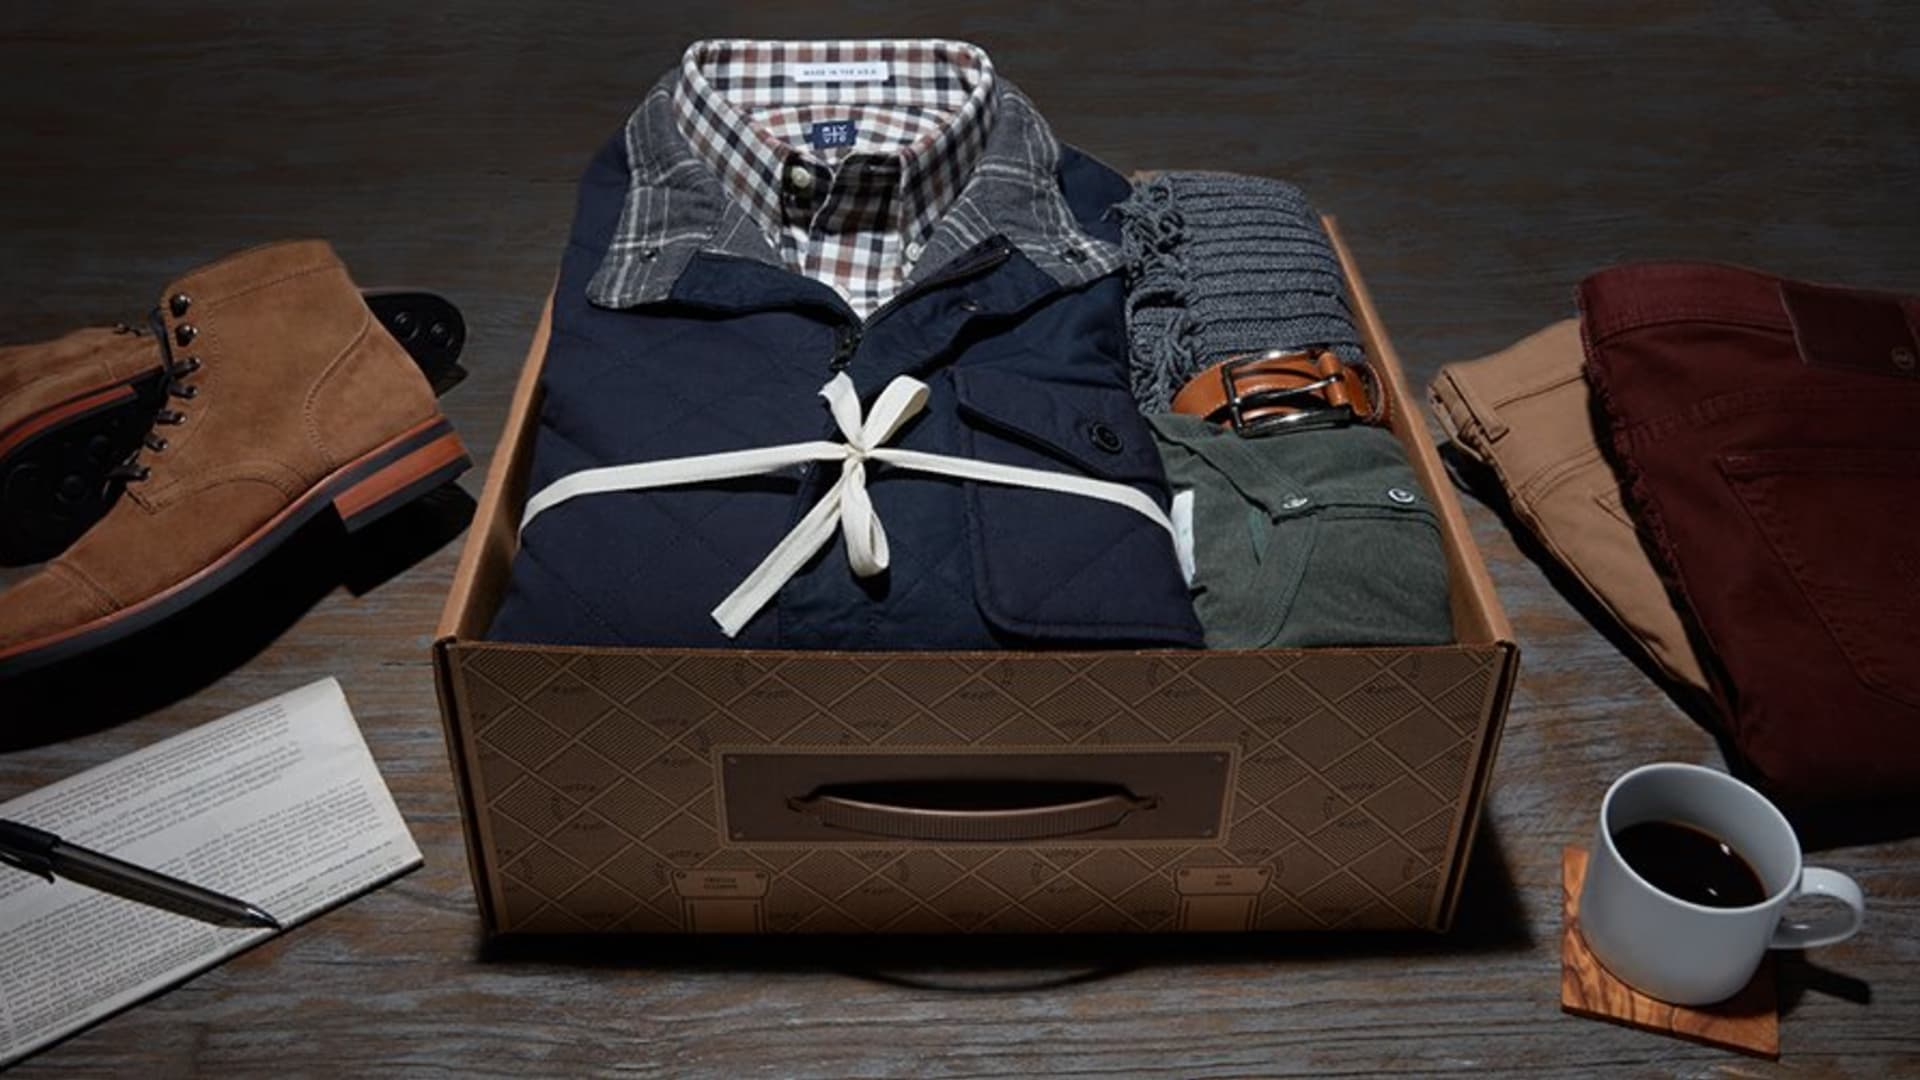 Why 'box fatigue' may be hitting the apparel industry, Stitch Fix